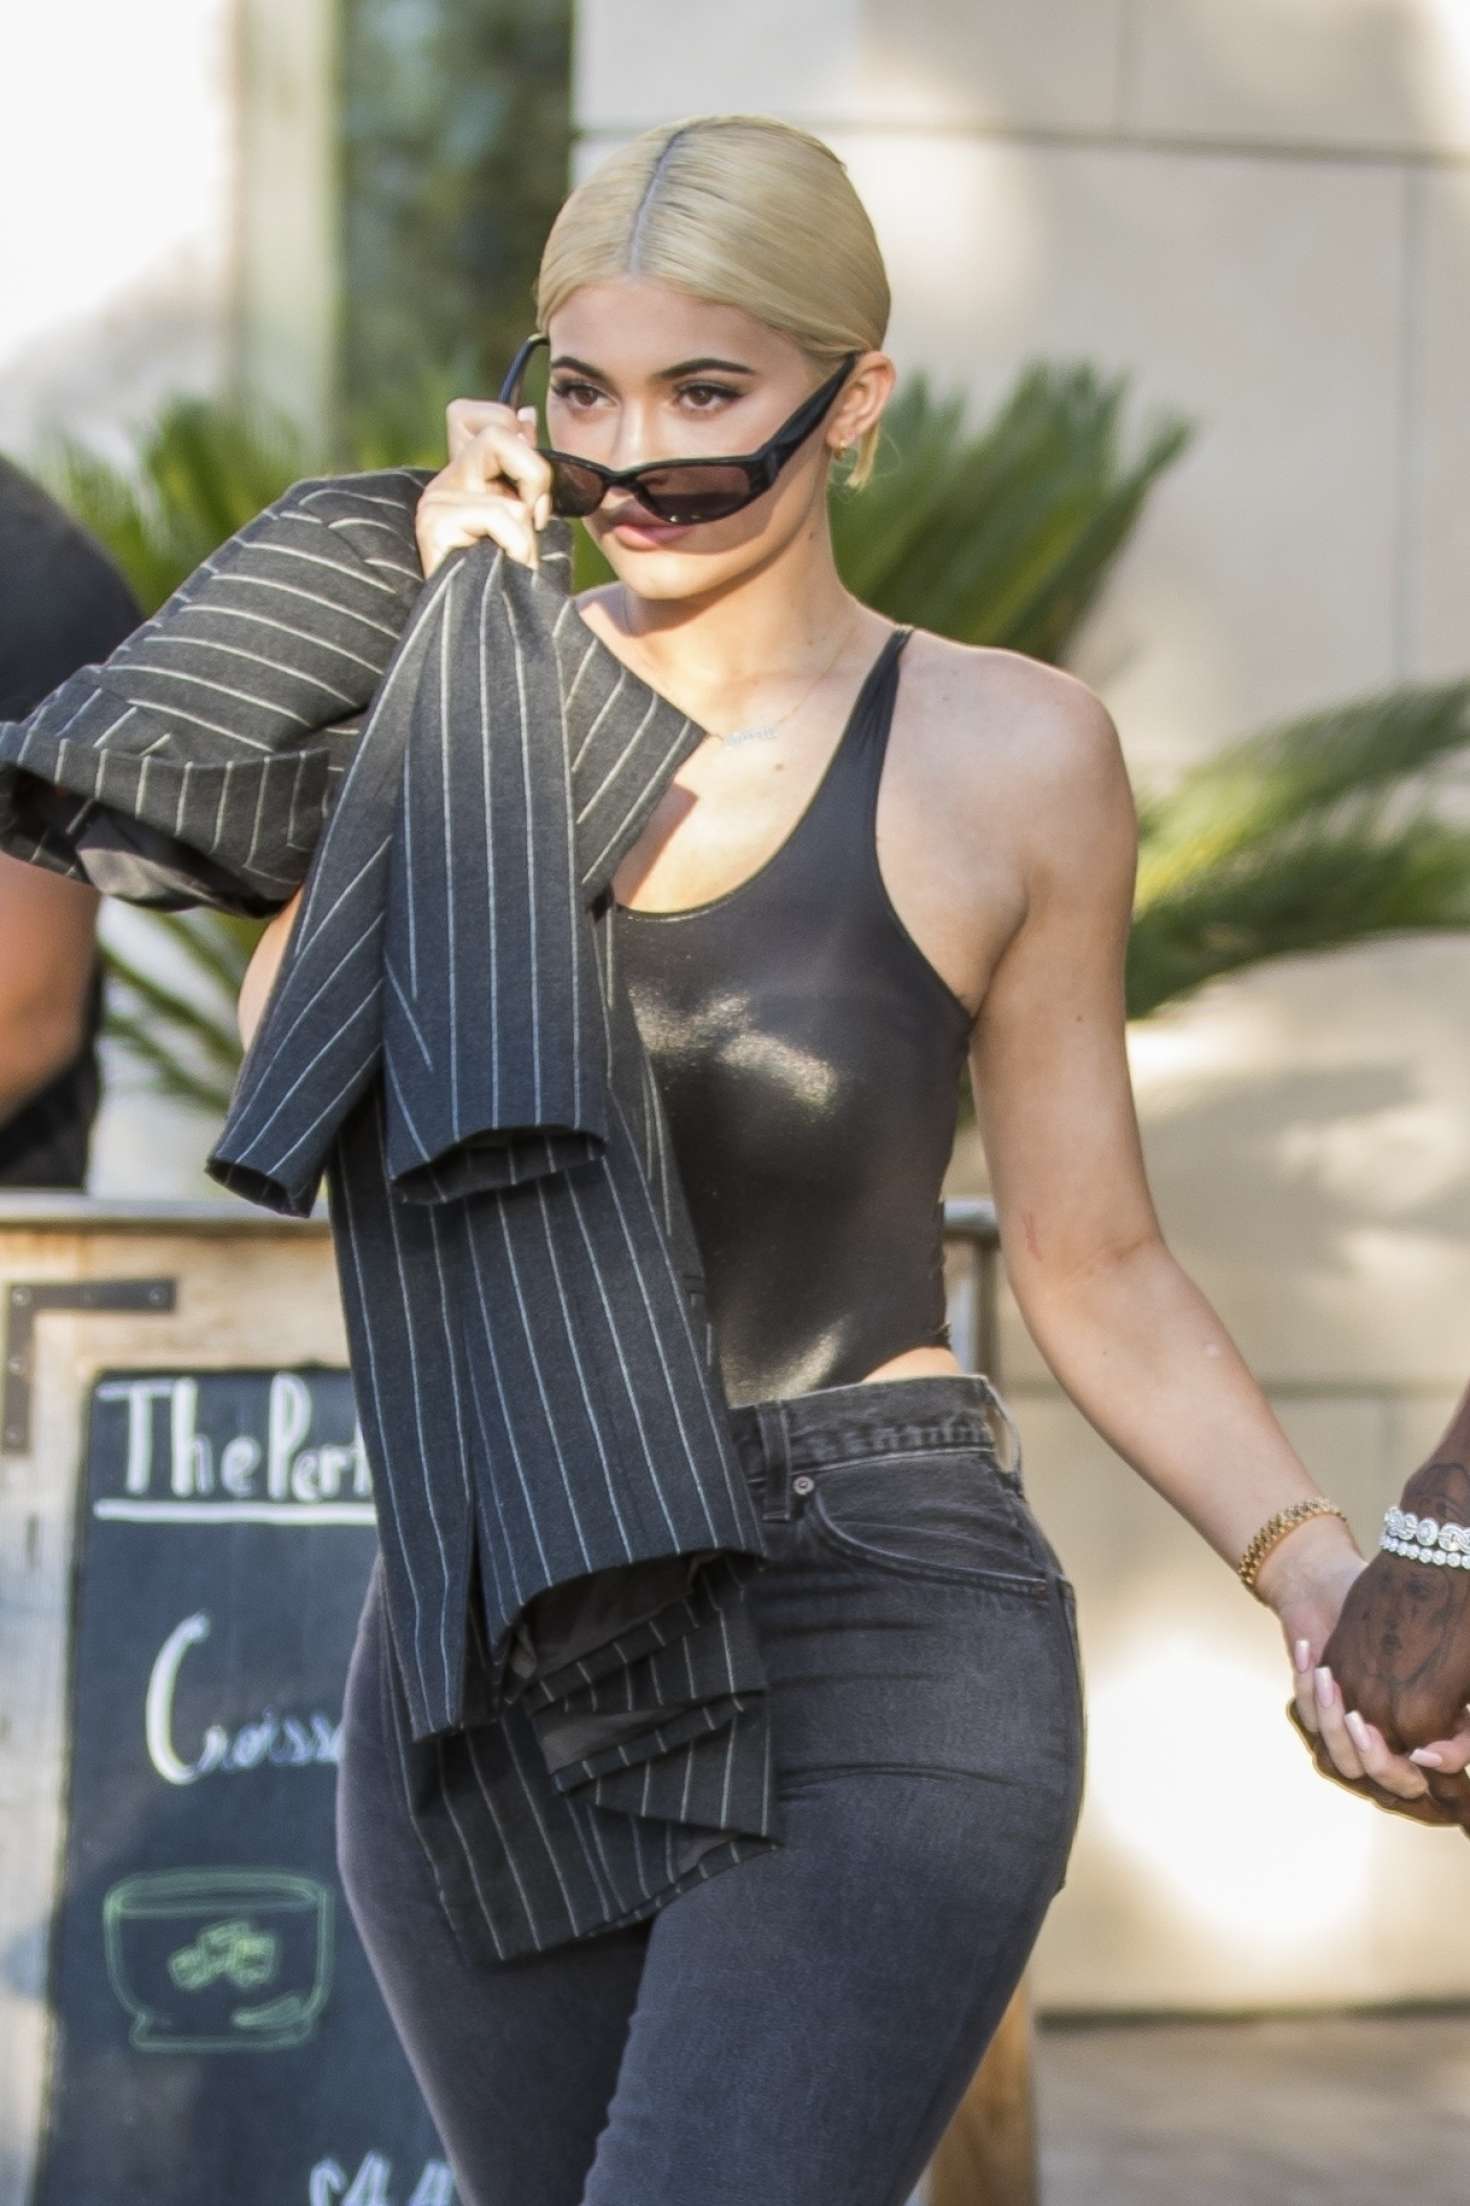 Kylie Jenner at Polacheckâ€™s Jewlers in Calabasas